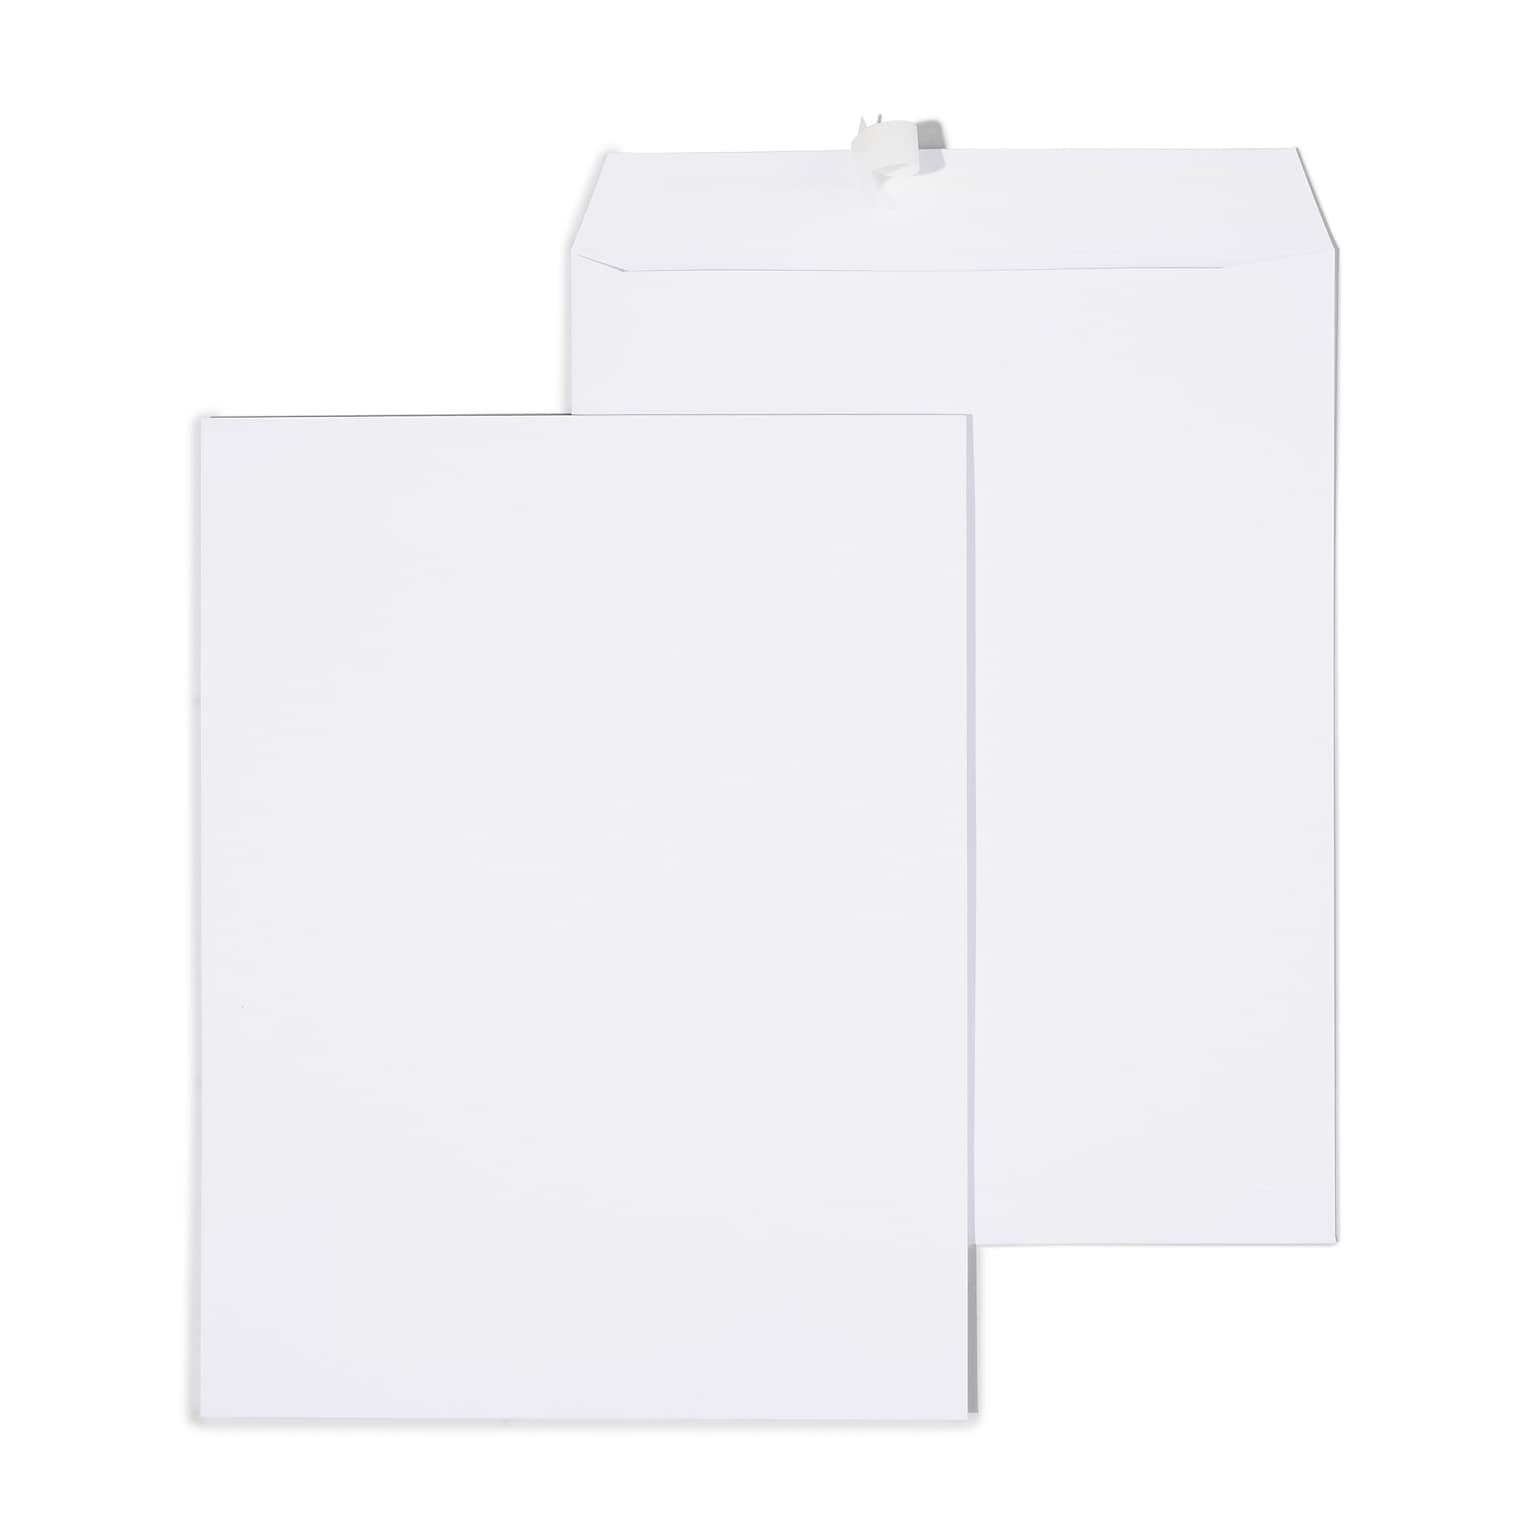 Quill Brand® Easy Close Catalog Envelope, 10 x 13, White, 250/Box (PS101328W)